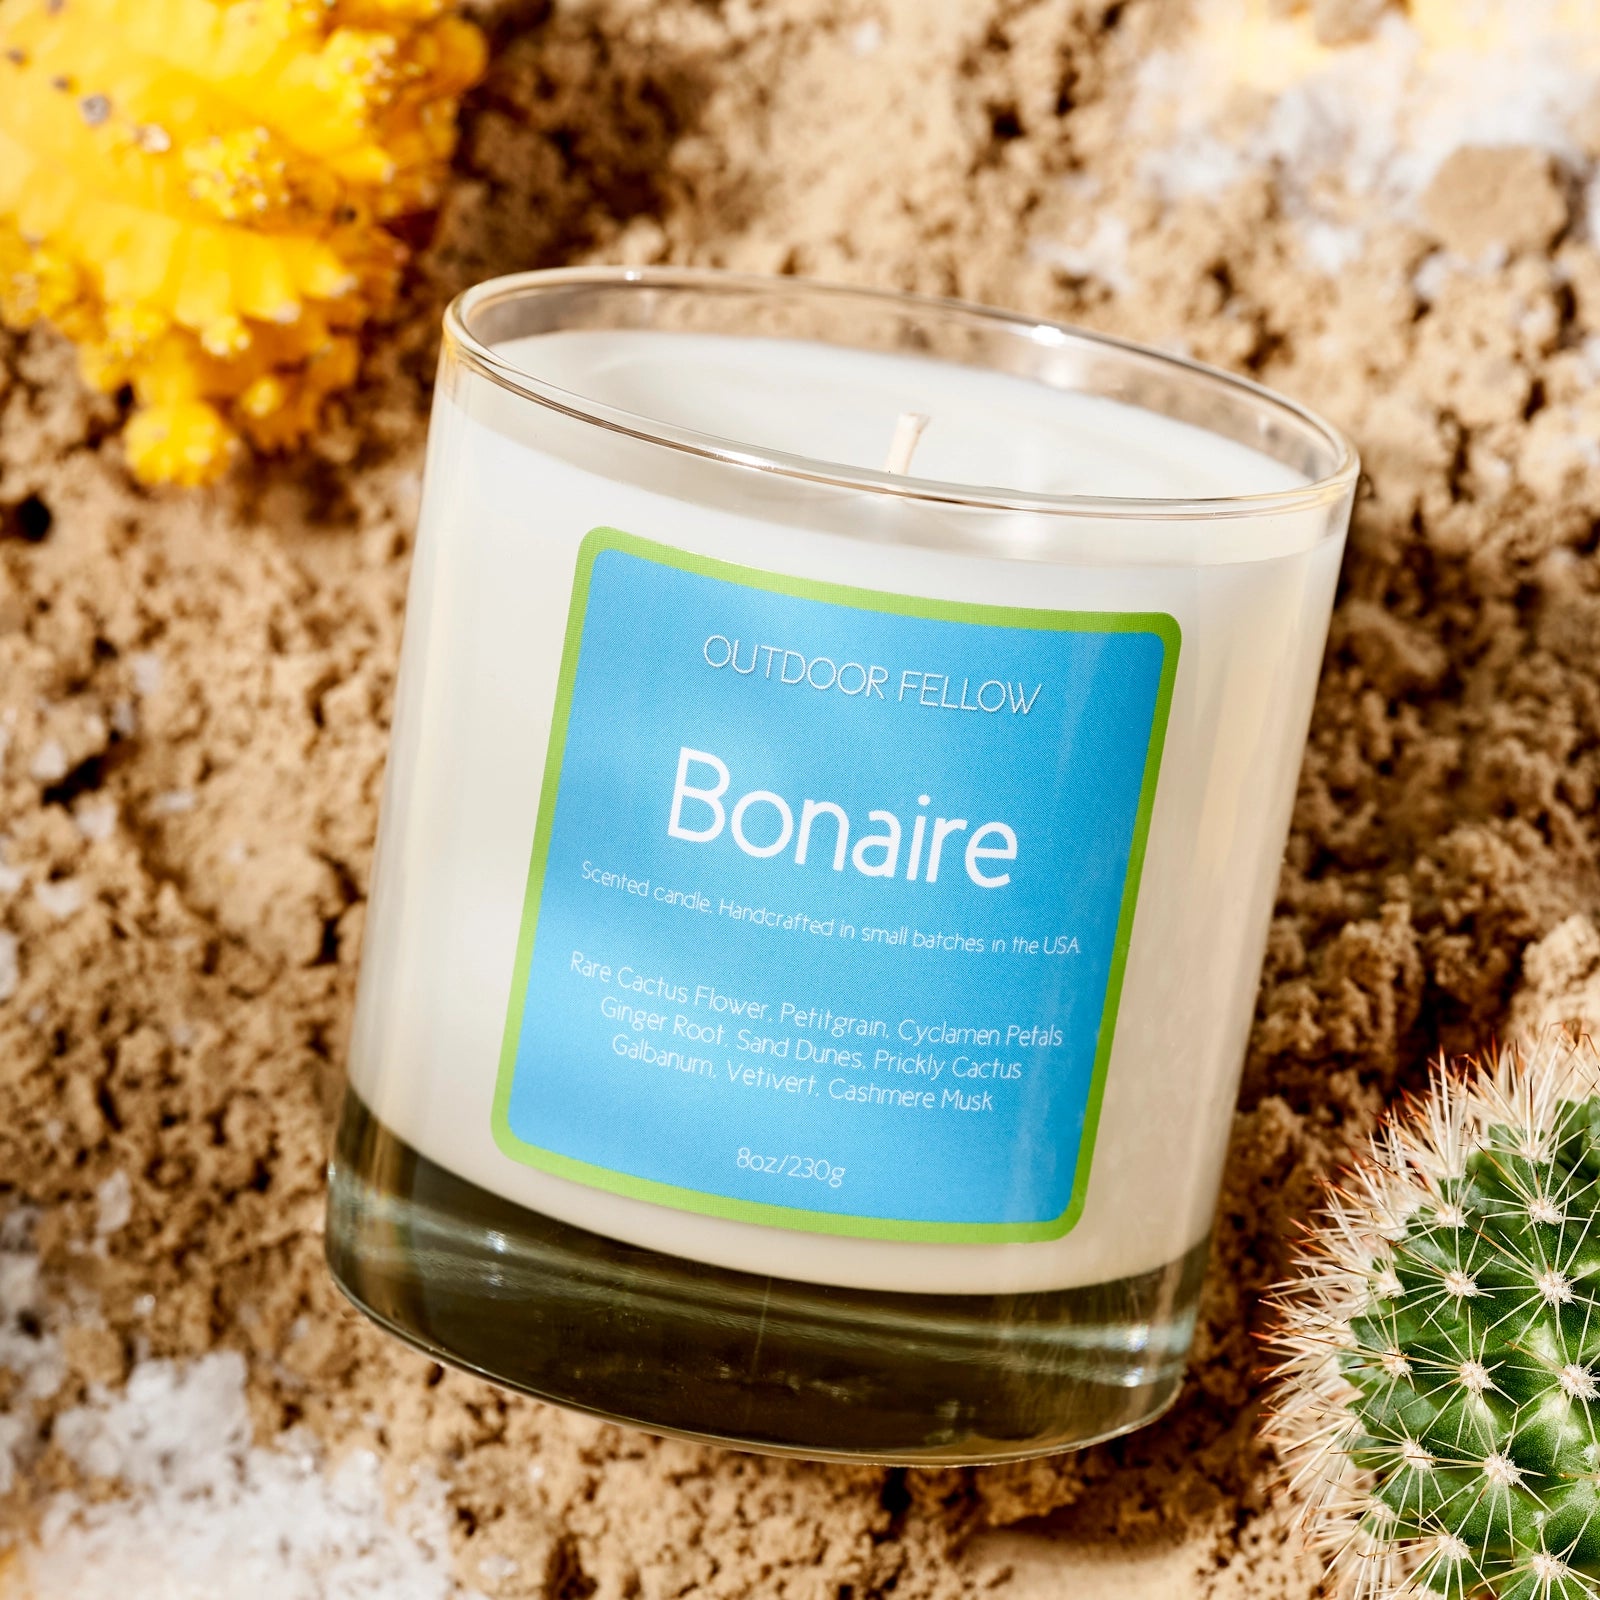 Bonaire scented candle